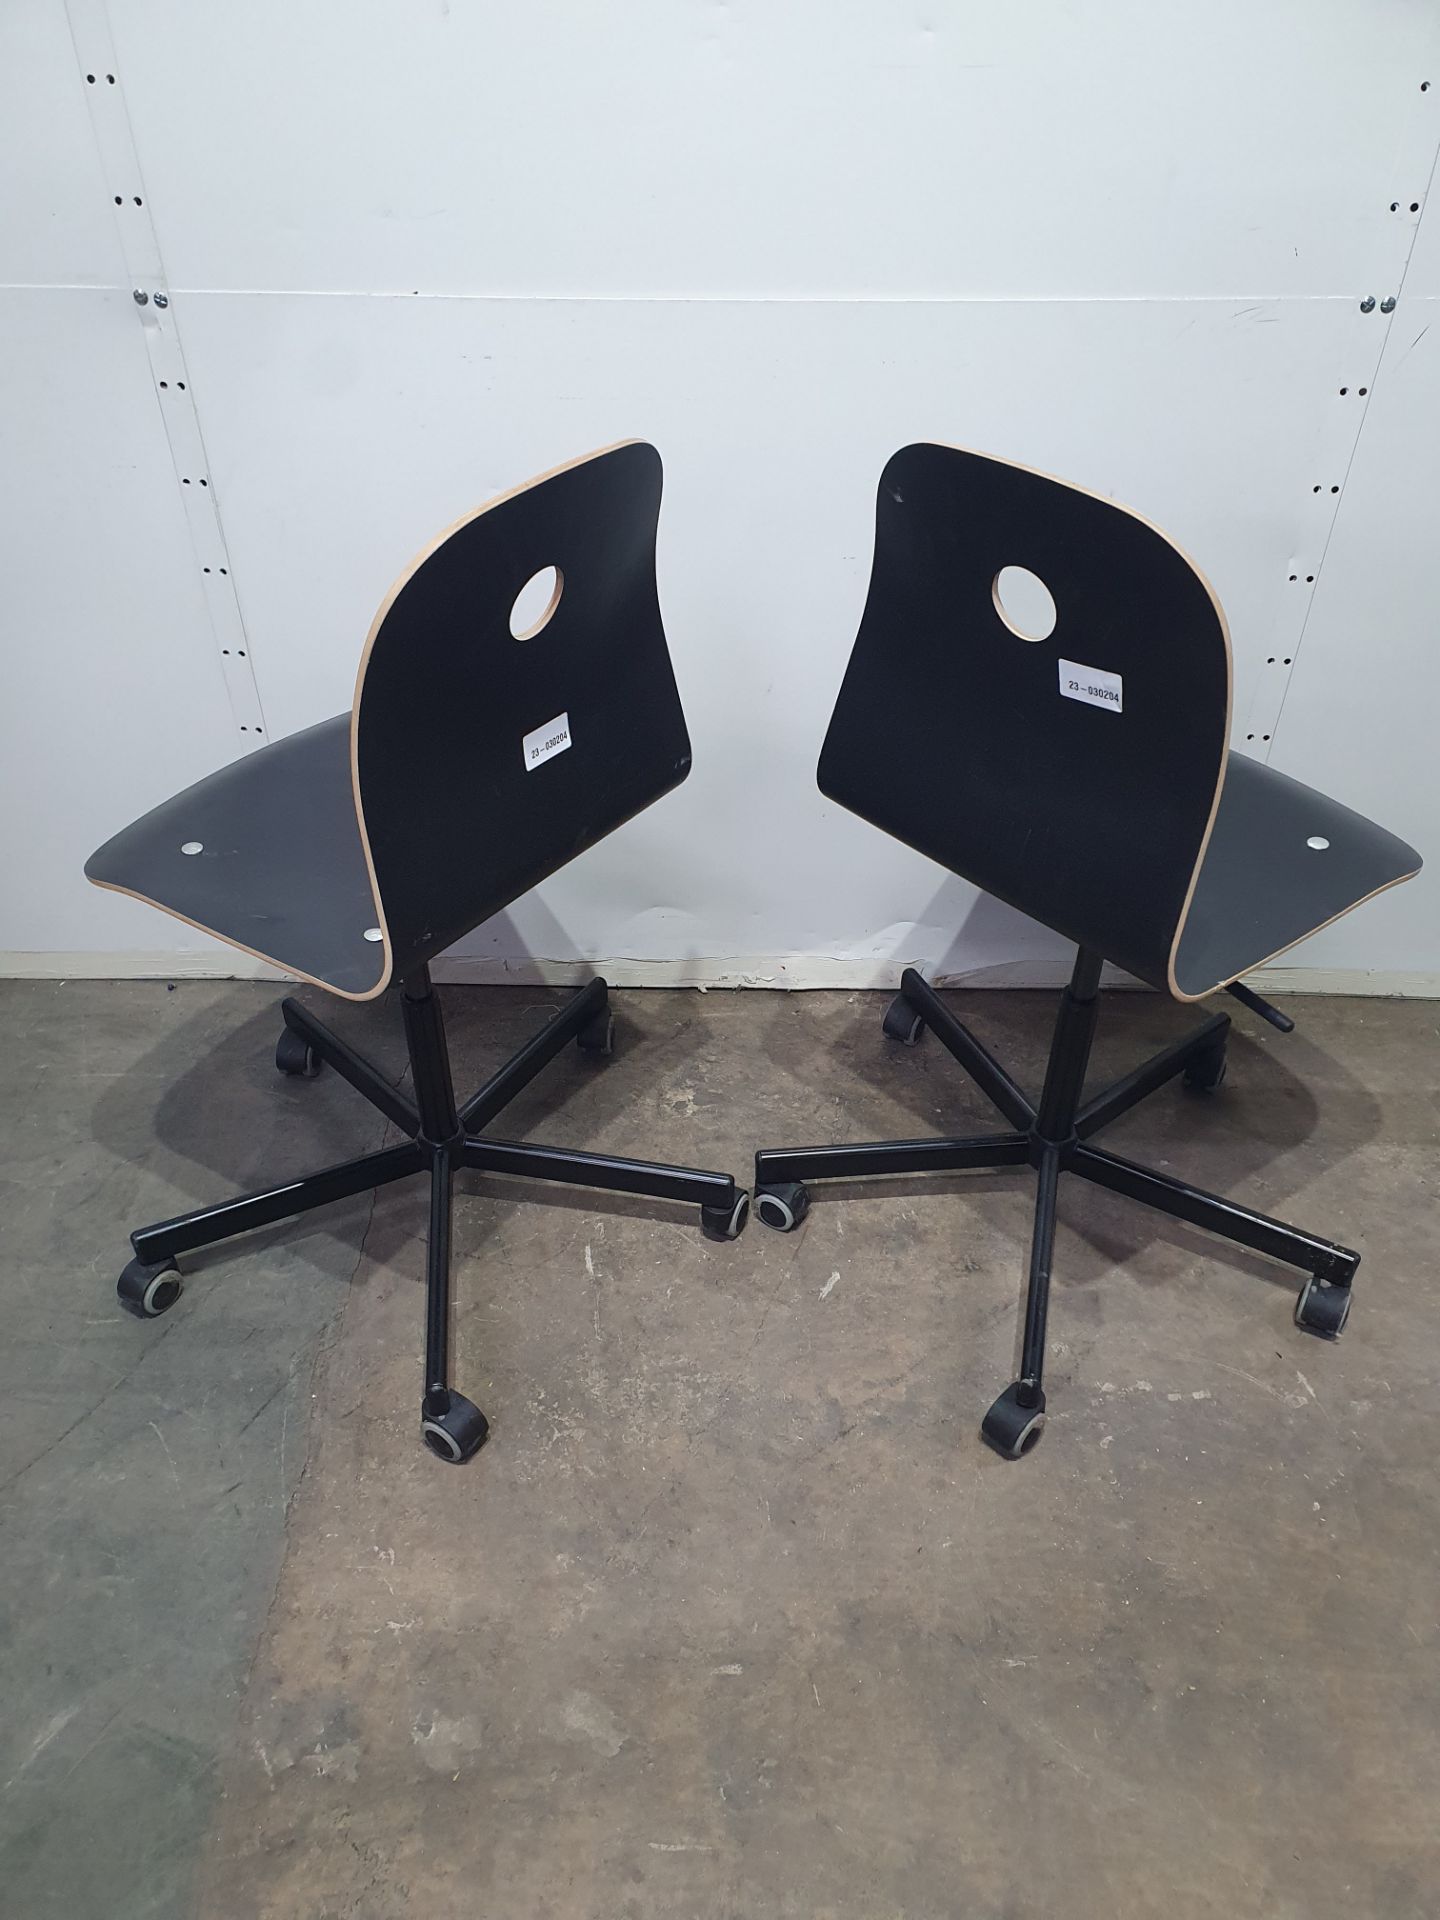 2 x Black Wooden Height Adjustable Chairs on Wheels - Image 4 of 5